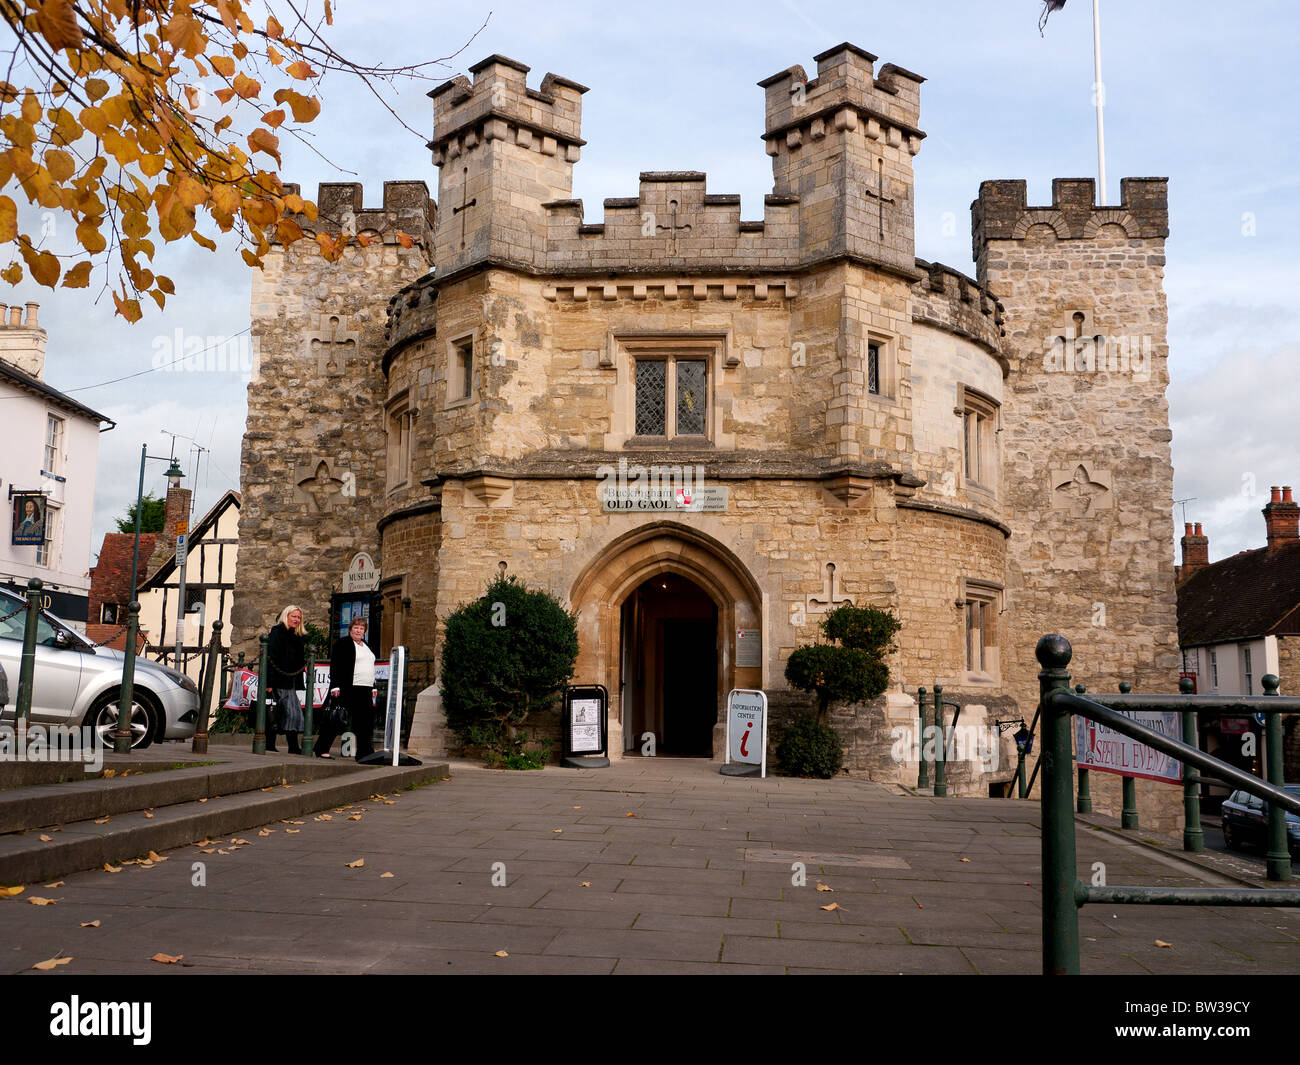 The old gaol, now a museum, Buckingham, England Stock Photo